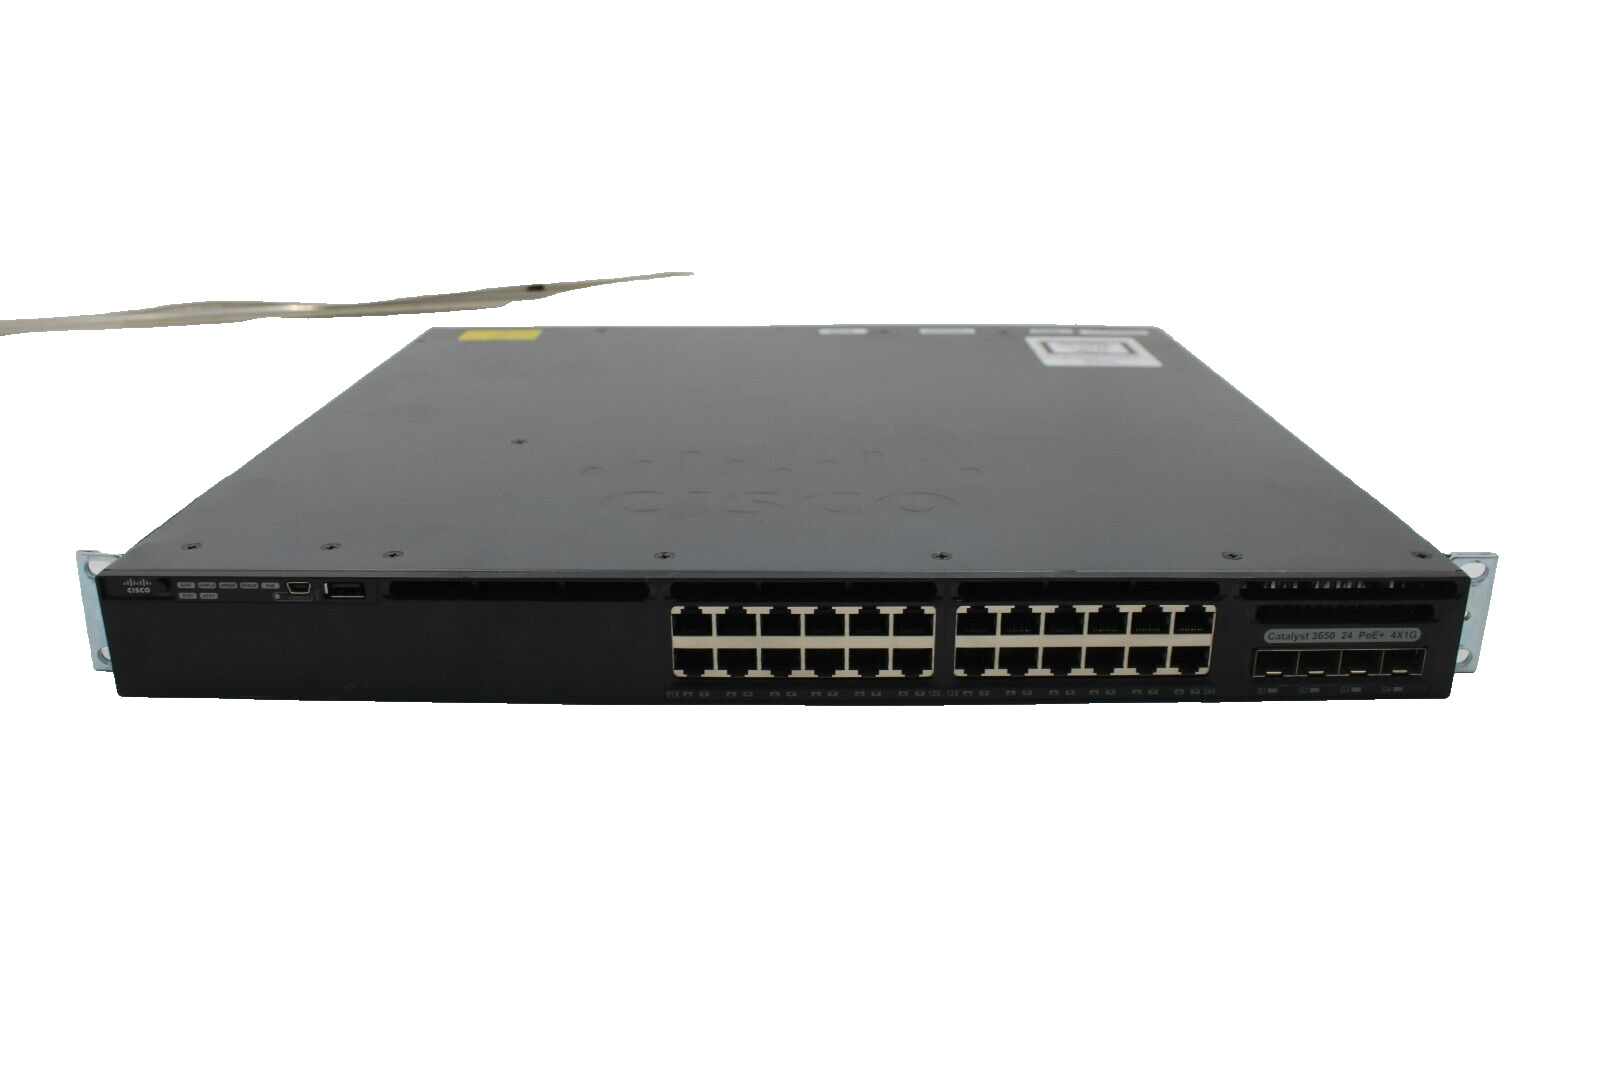 Cisco Catalyst WS-C3650-24PS-L 24-Port Gigabit Ethernet Network Switch TESTED